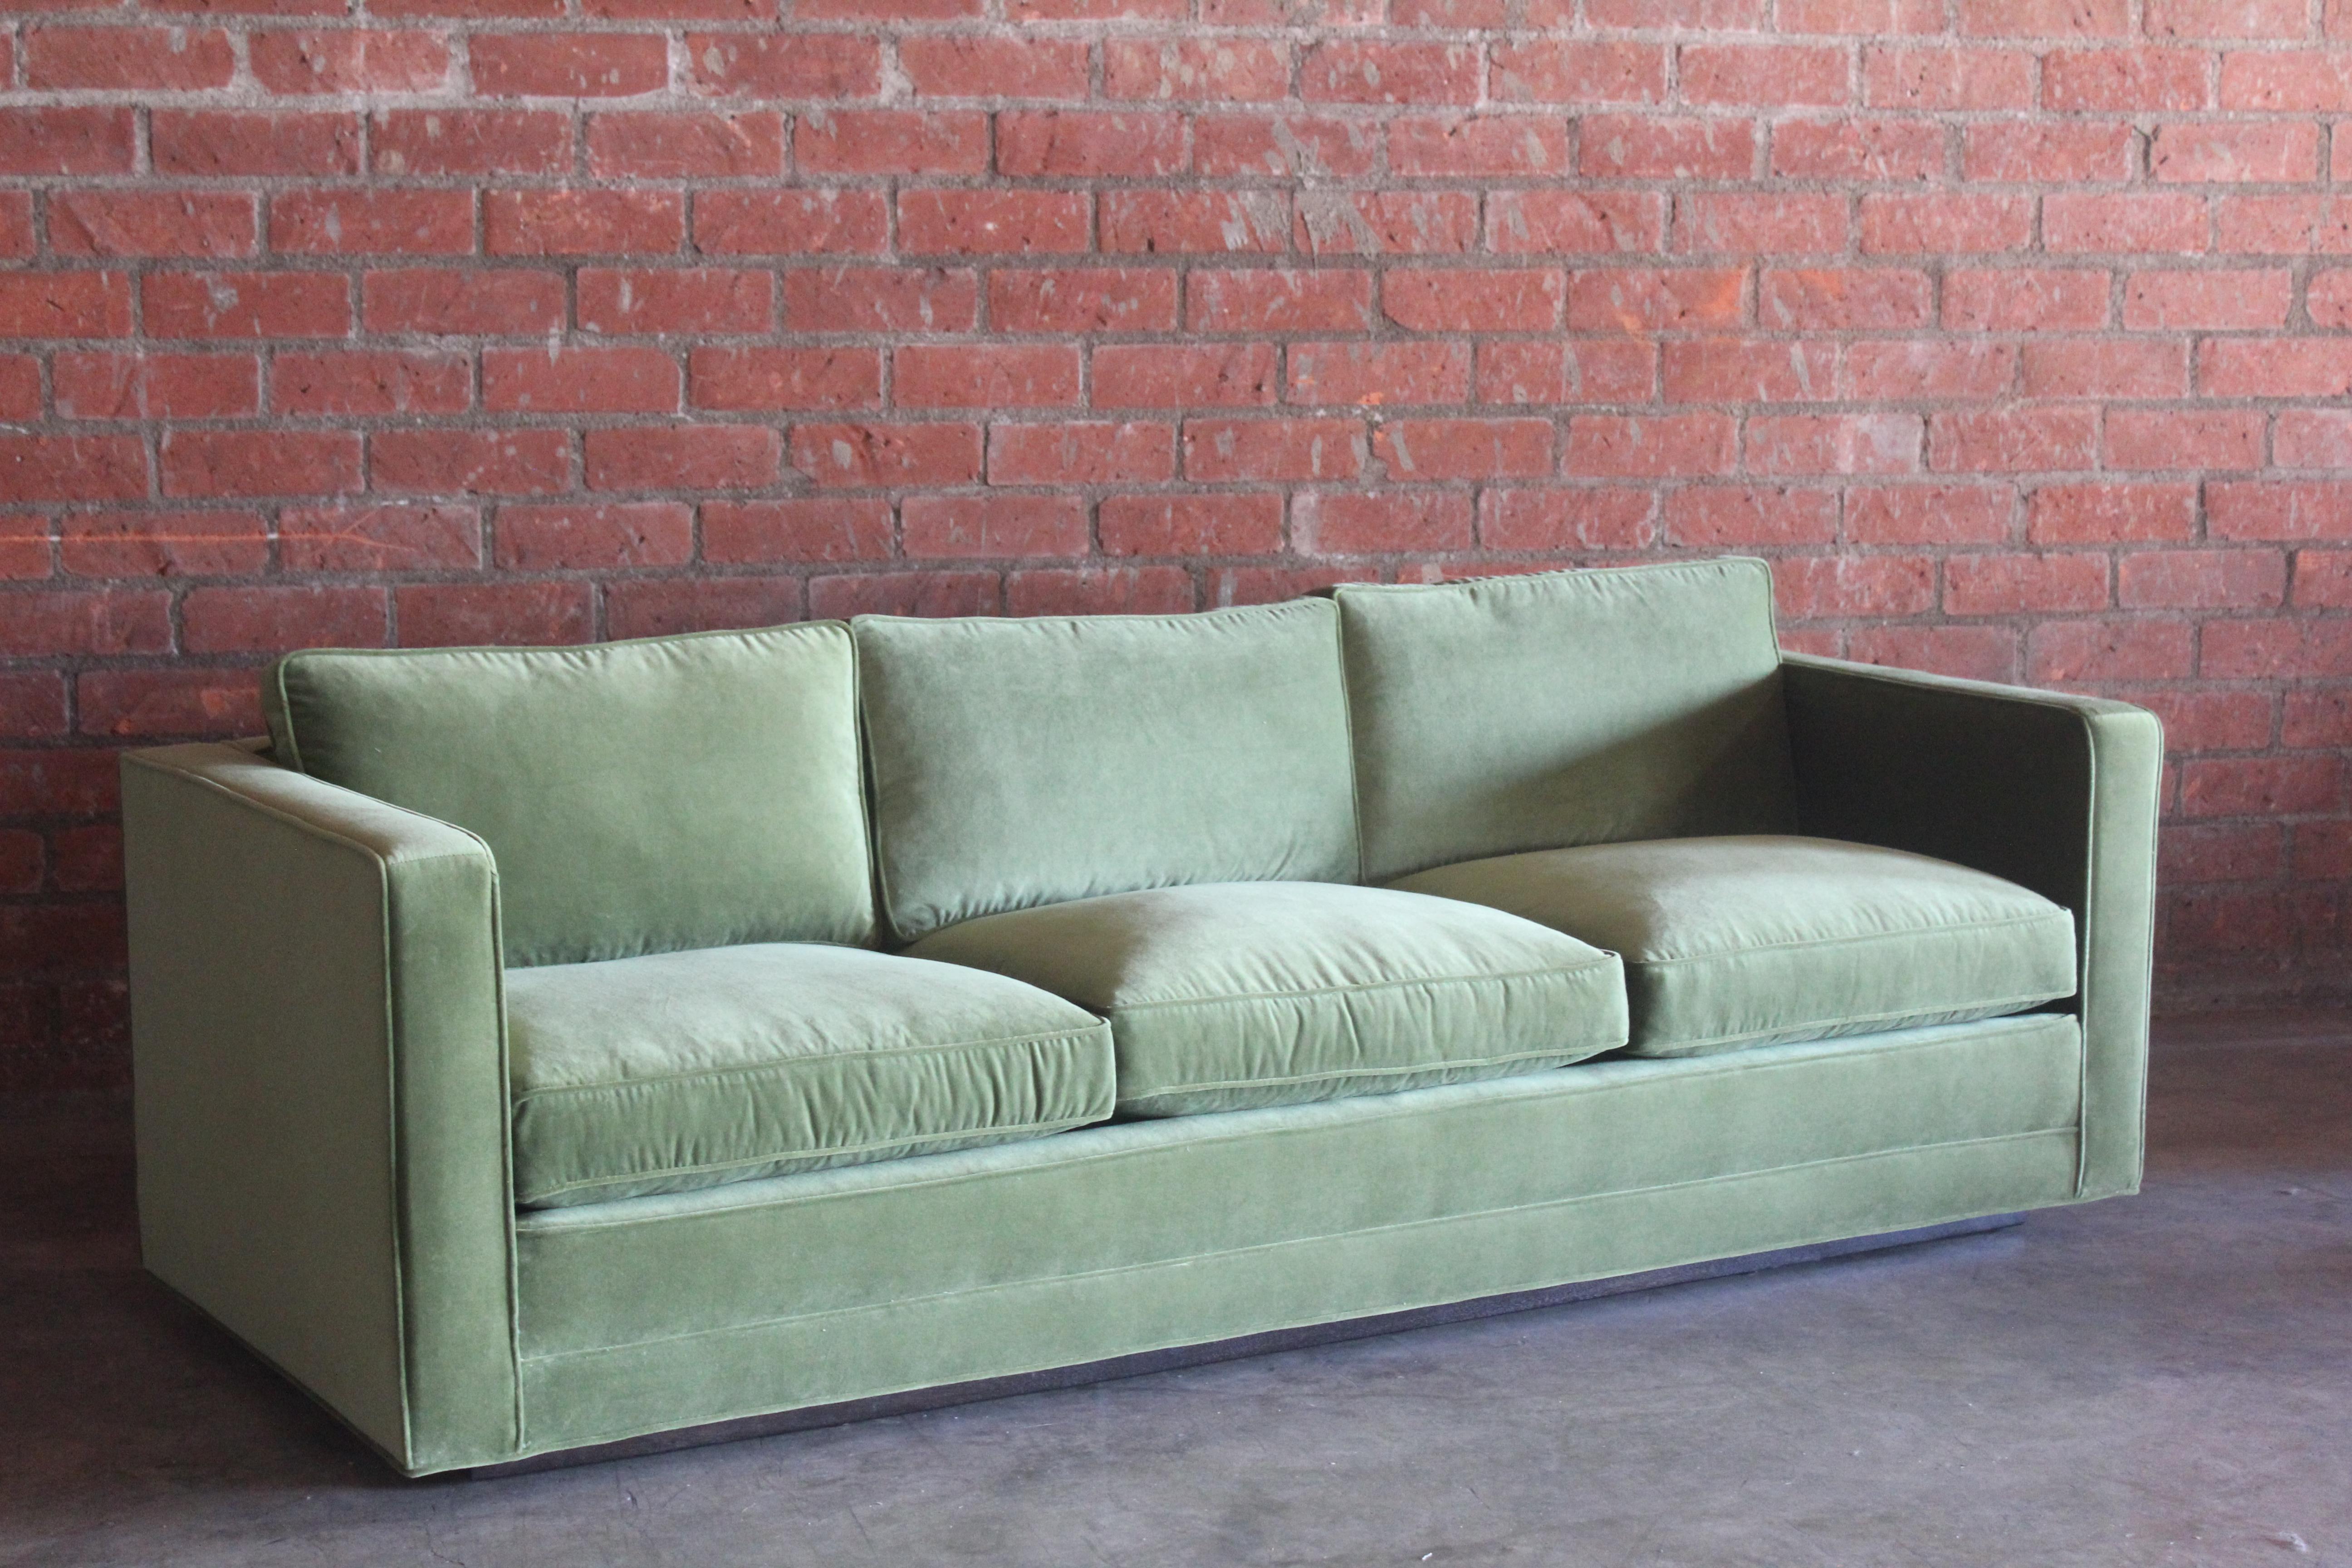 American Tuxedo Sofa by Edward Wormley for Dunbar, 1950s. Pair Available, Sold Separately